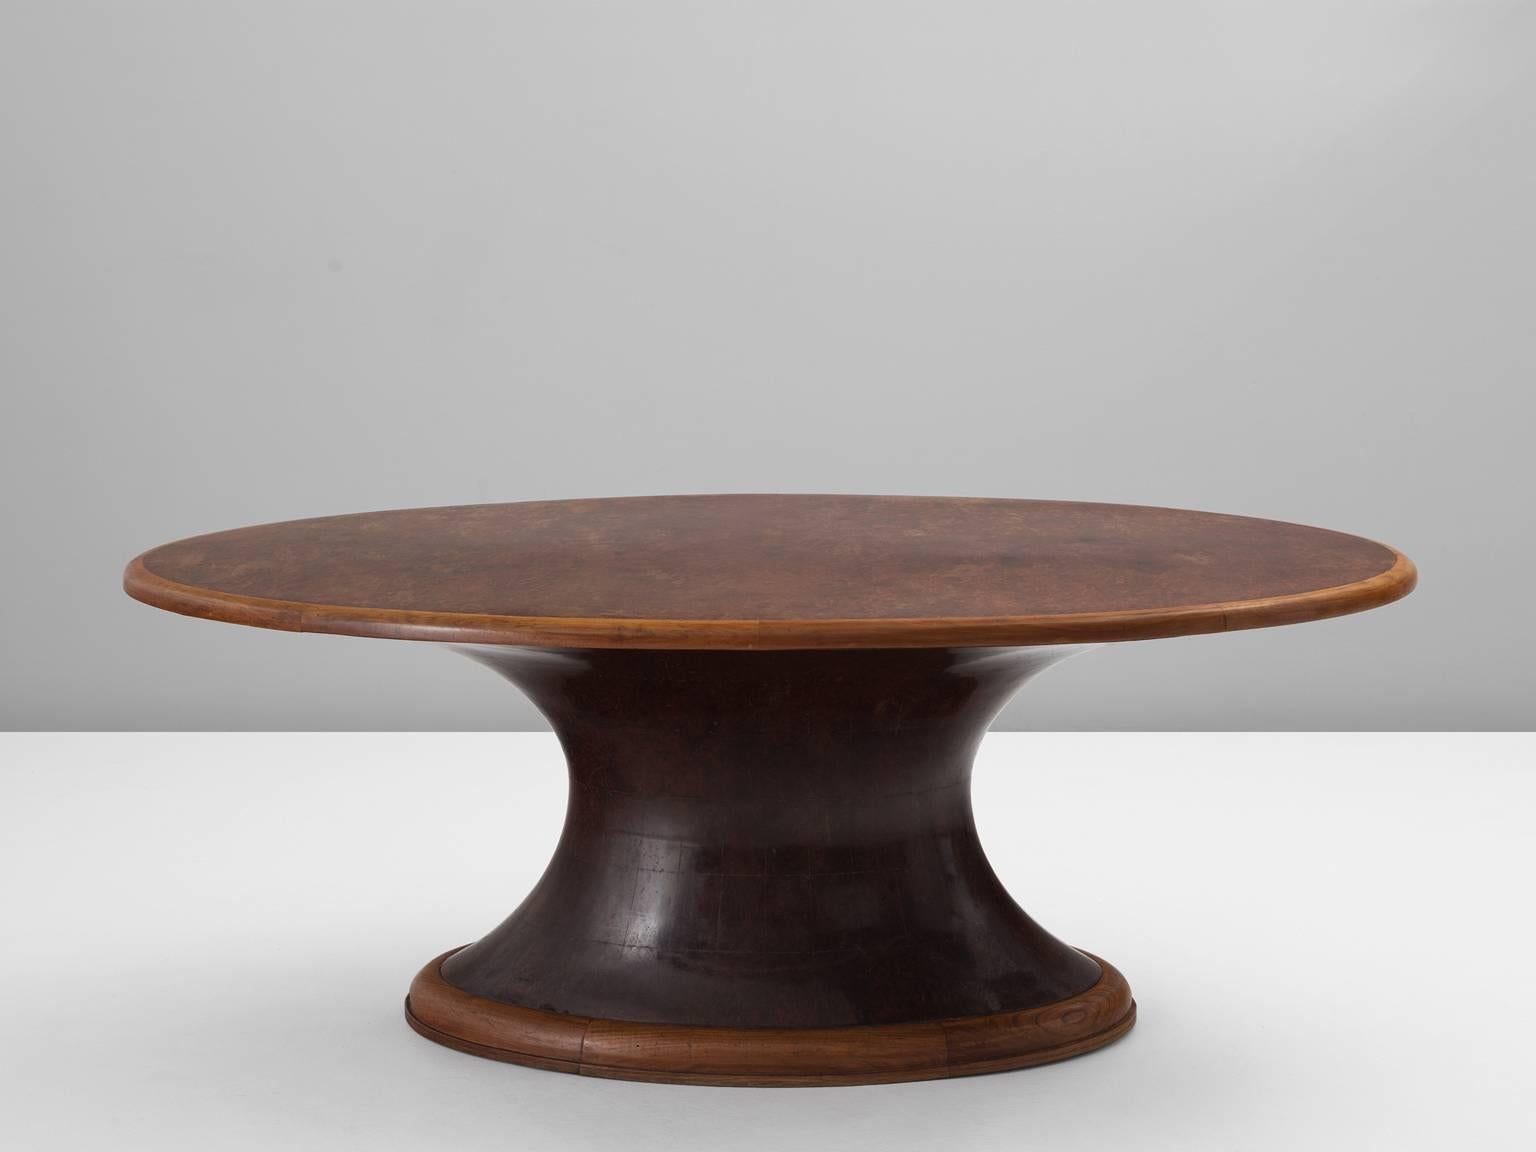 Dining table, in burl and walnut, Italy, 1930s.

Organic shaped pedestal table in burl and walnut. This art-deco table is made with great craftsmanship and time-consuming techniques. The base consists of a wooden frame and is upholstered with wooden